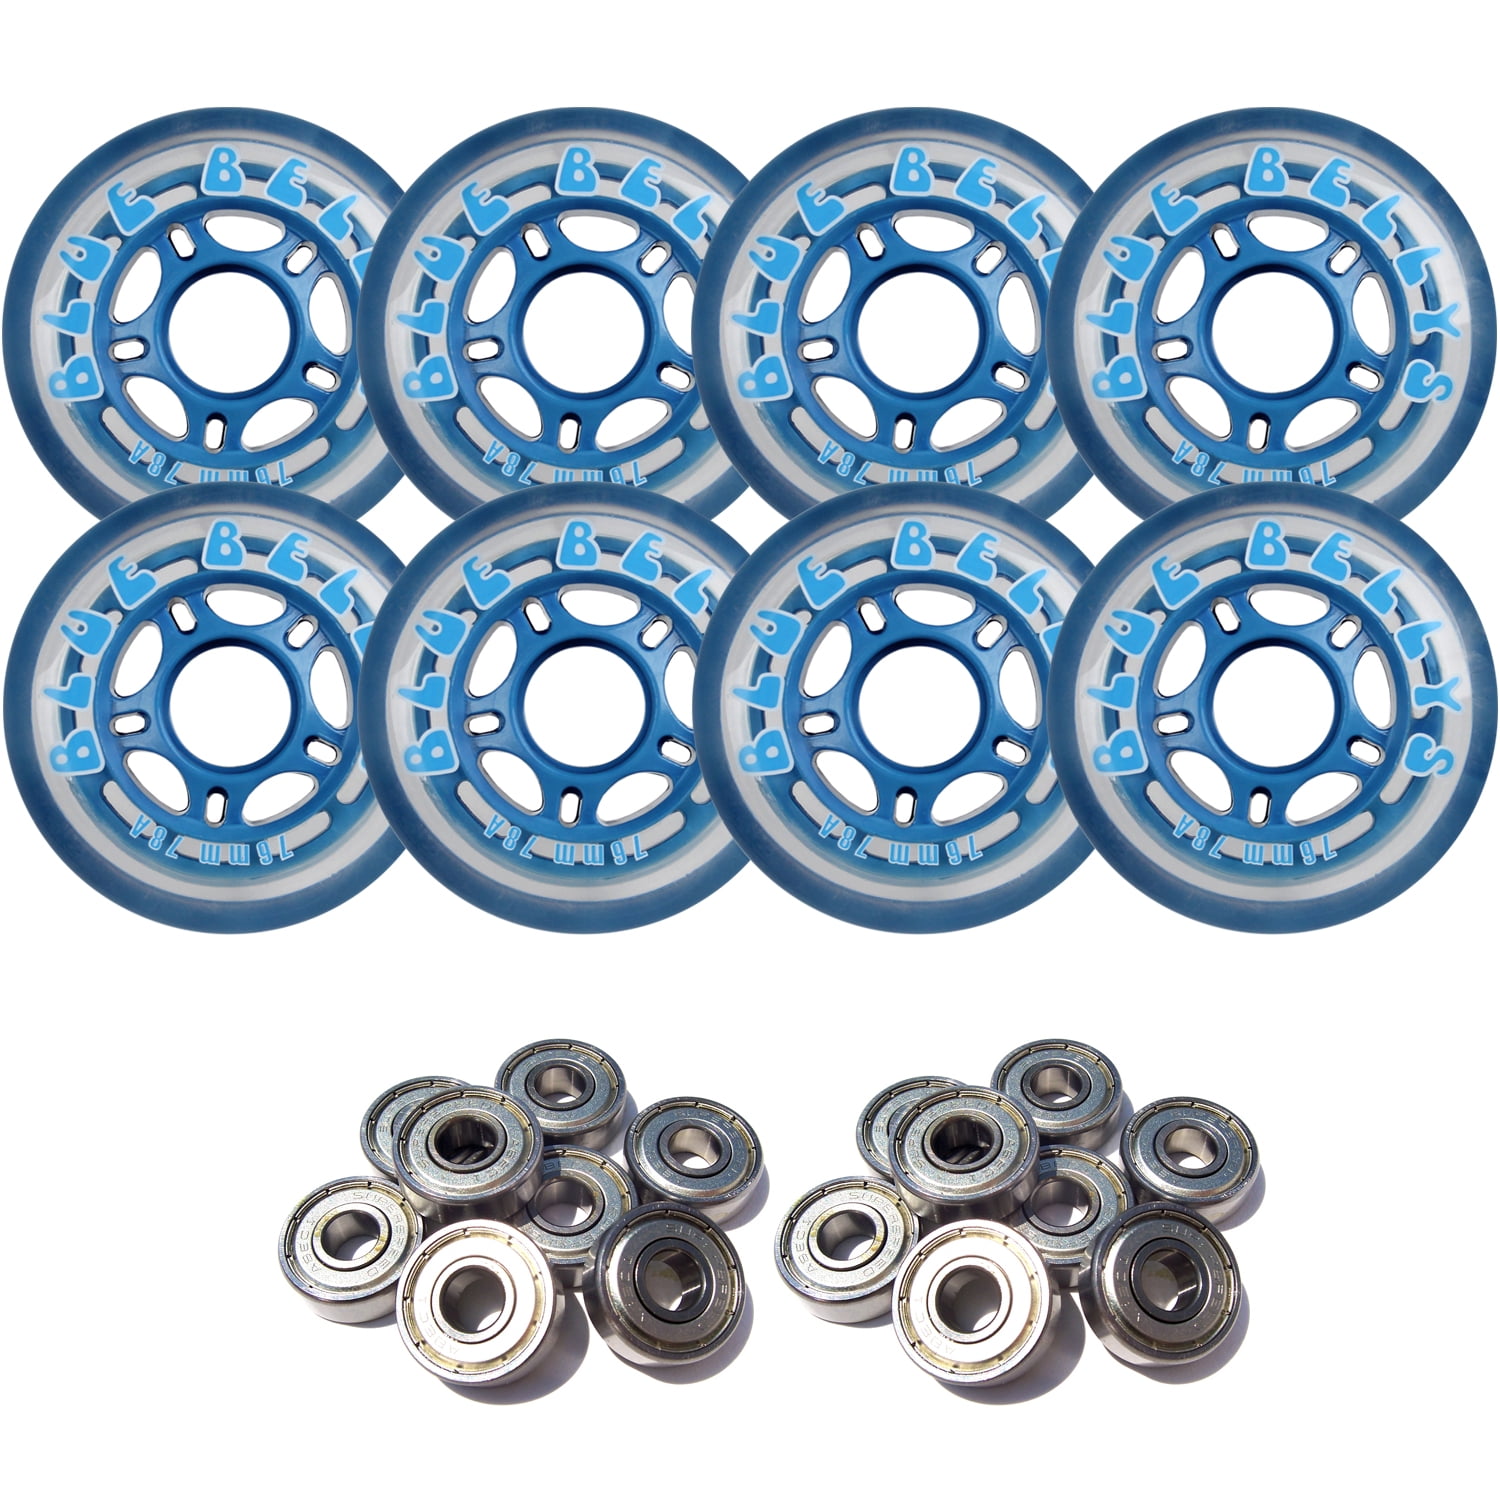 Clear Lot of 100 Rollerblade Inline Fitness Hockey Skate Wheels 70mm 78A 